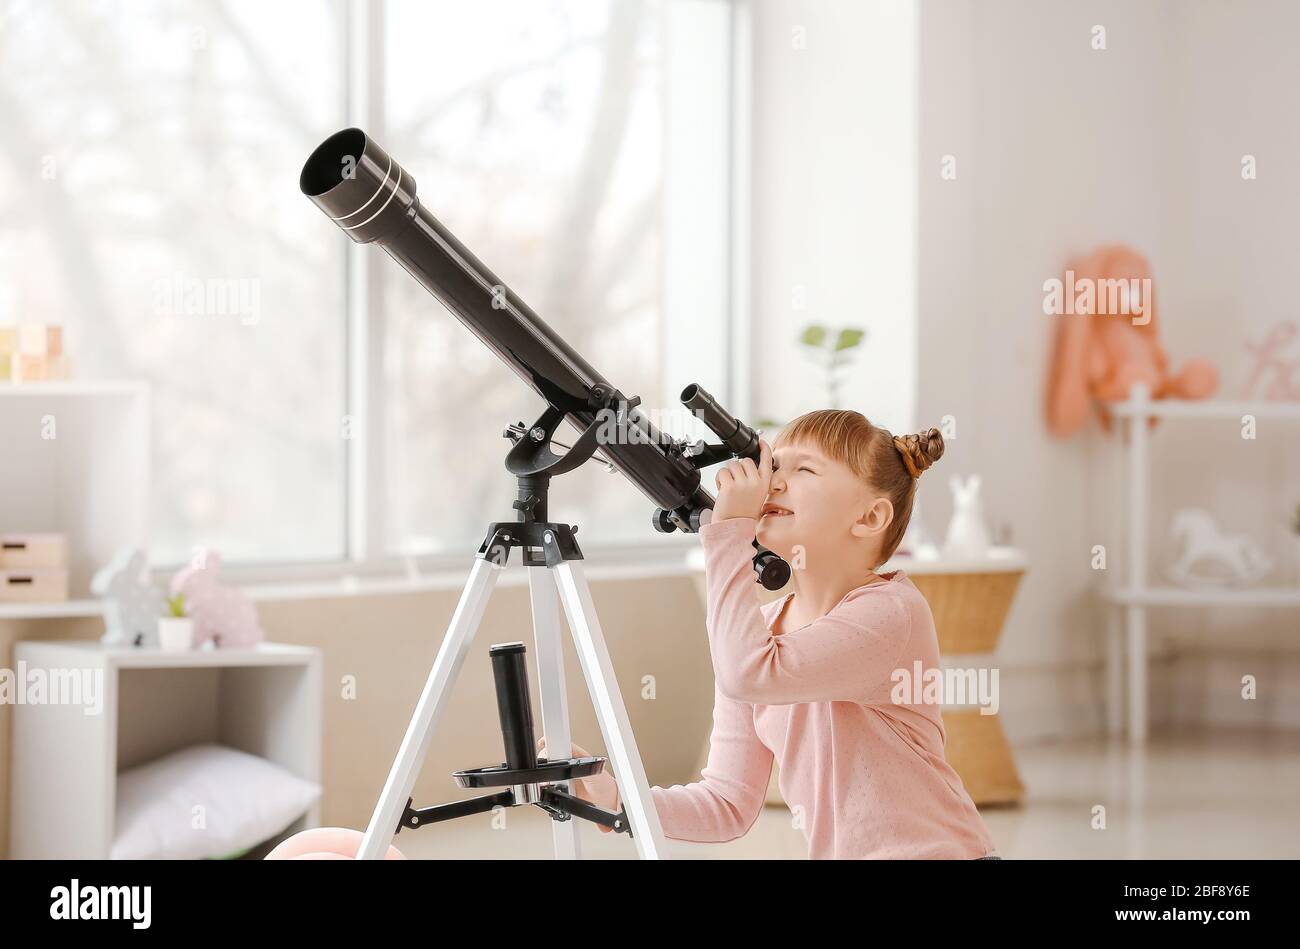 telescope at home